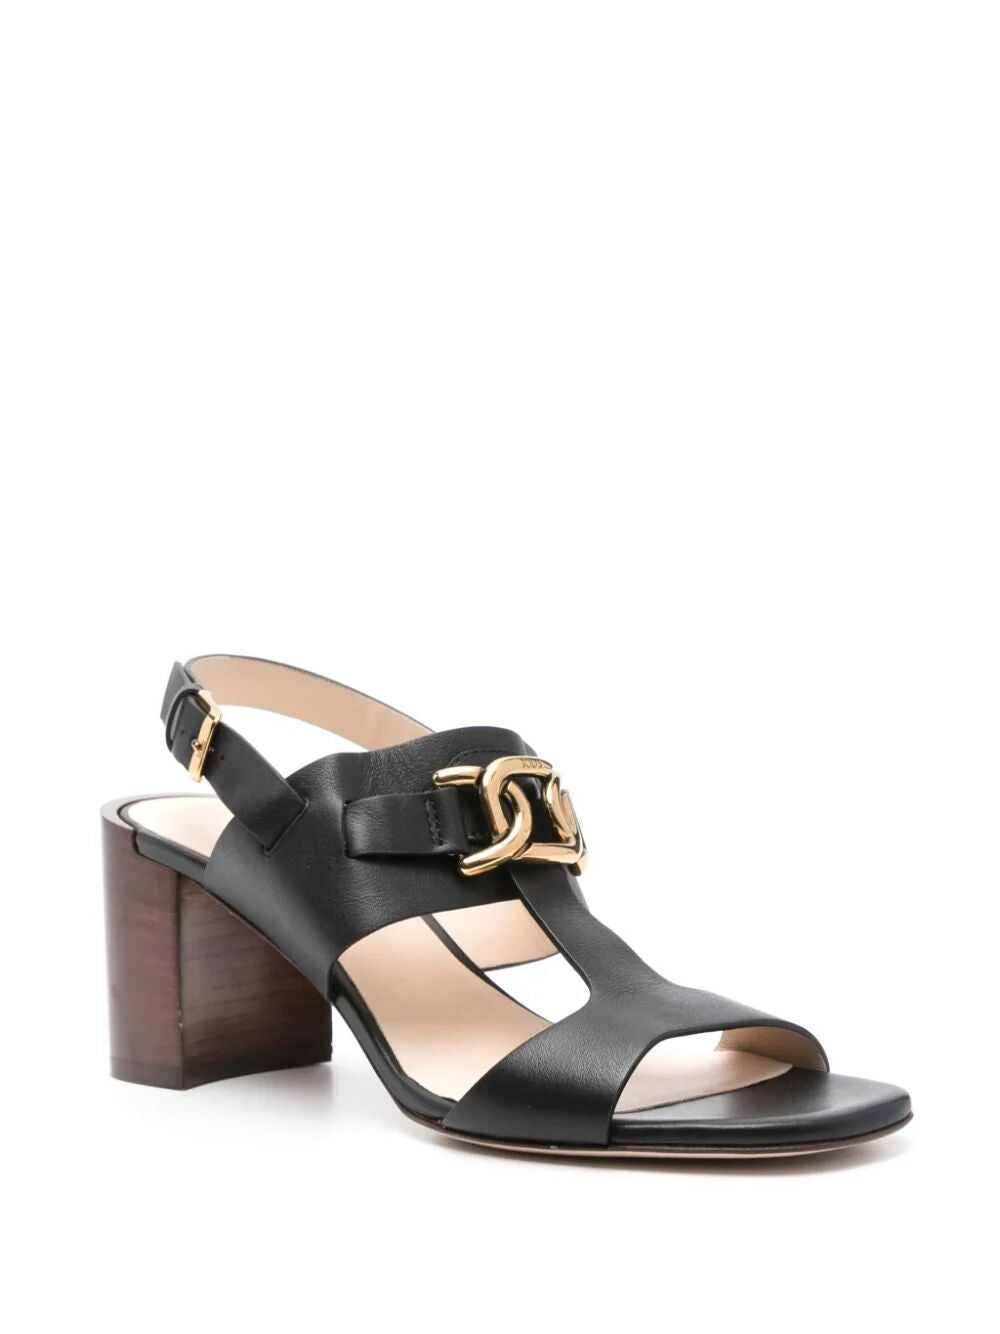 TOD'S Stylish Black Leather Sandals for Women